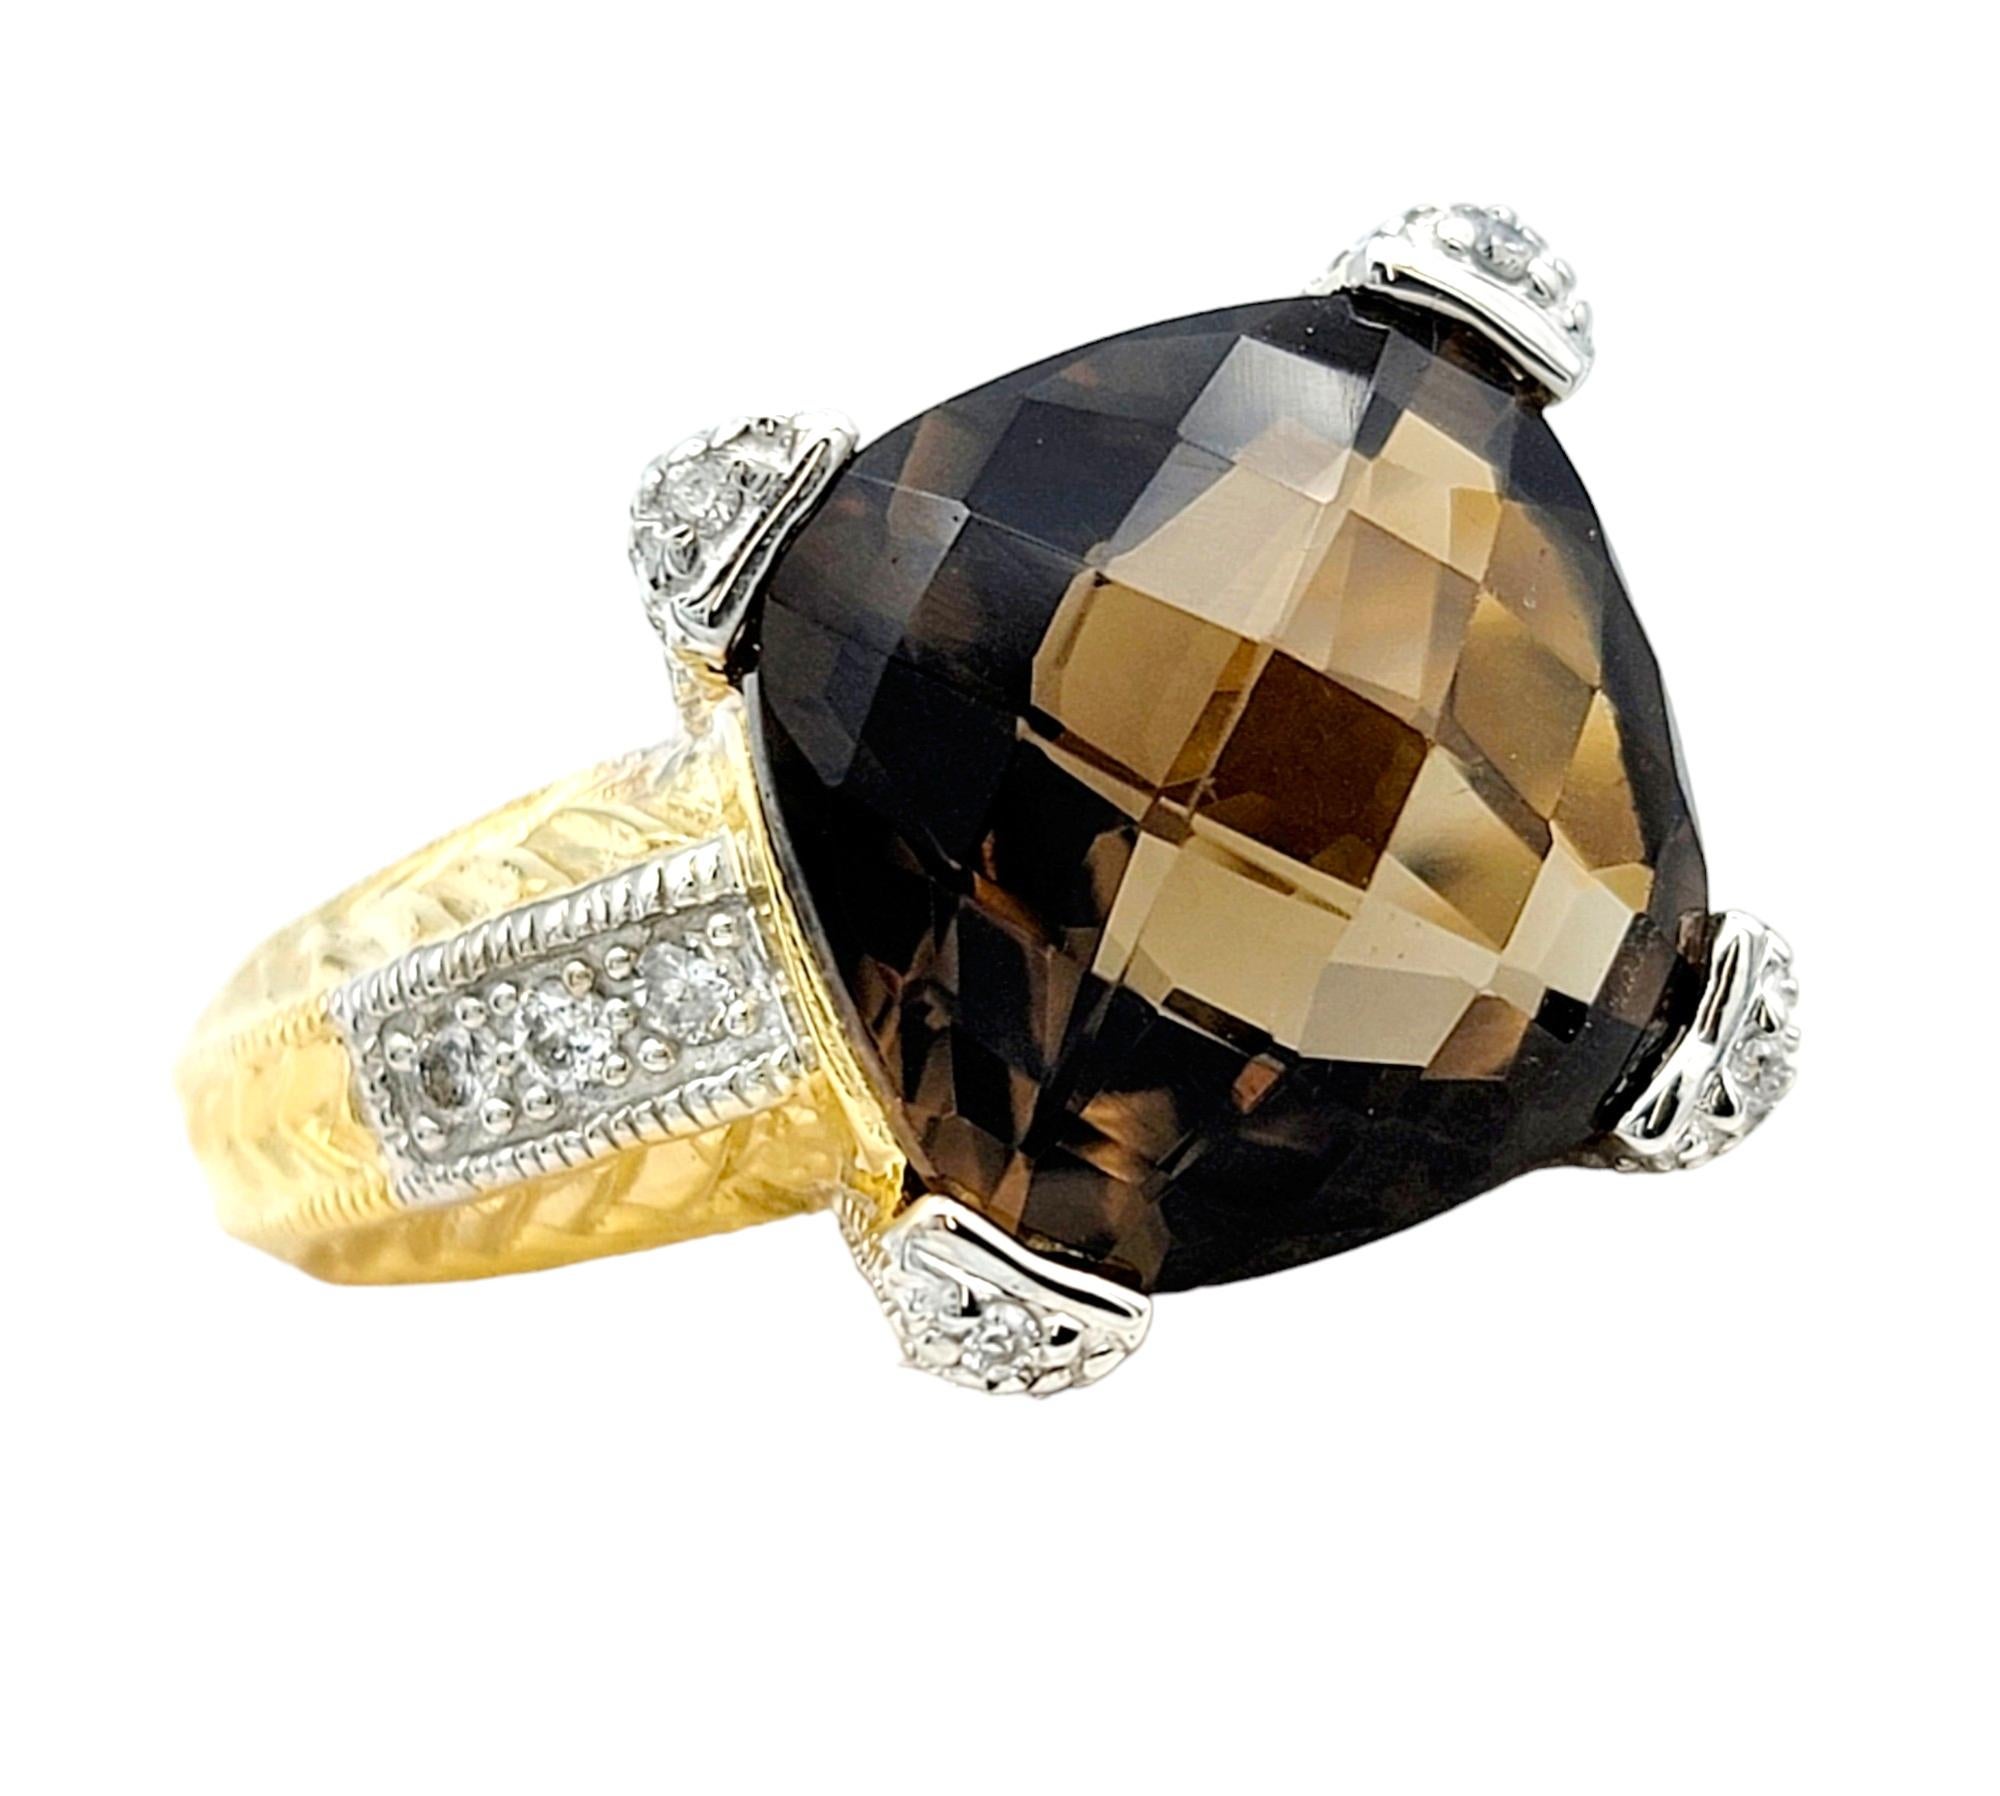 Ring size: 6.75

Introducing our stunning cushion checkered cut smokey quartz ring, a captivating piece that effortlessly blends elegance with a touch of modern flair. Set in lustrous 14k yellow gold, this ring boasts a textured detail with a chic